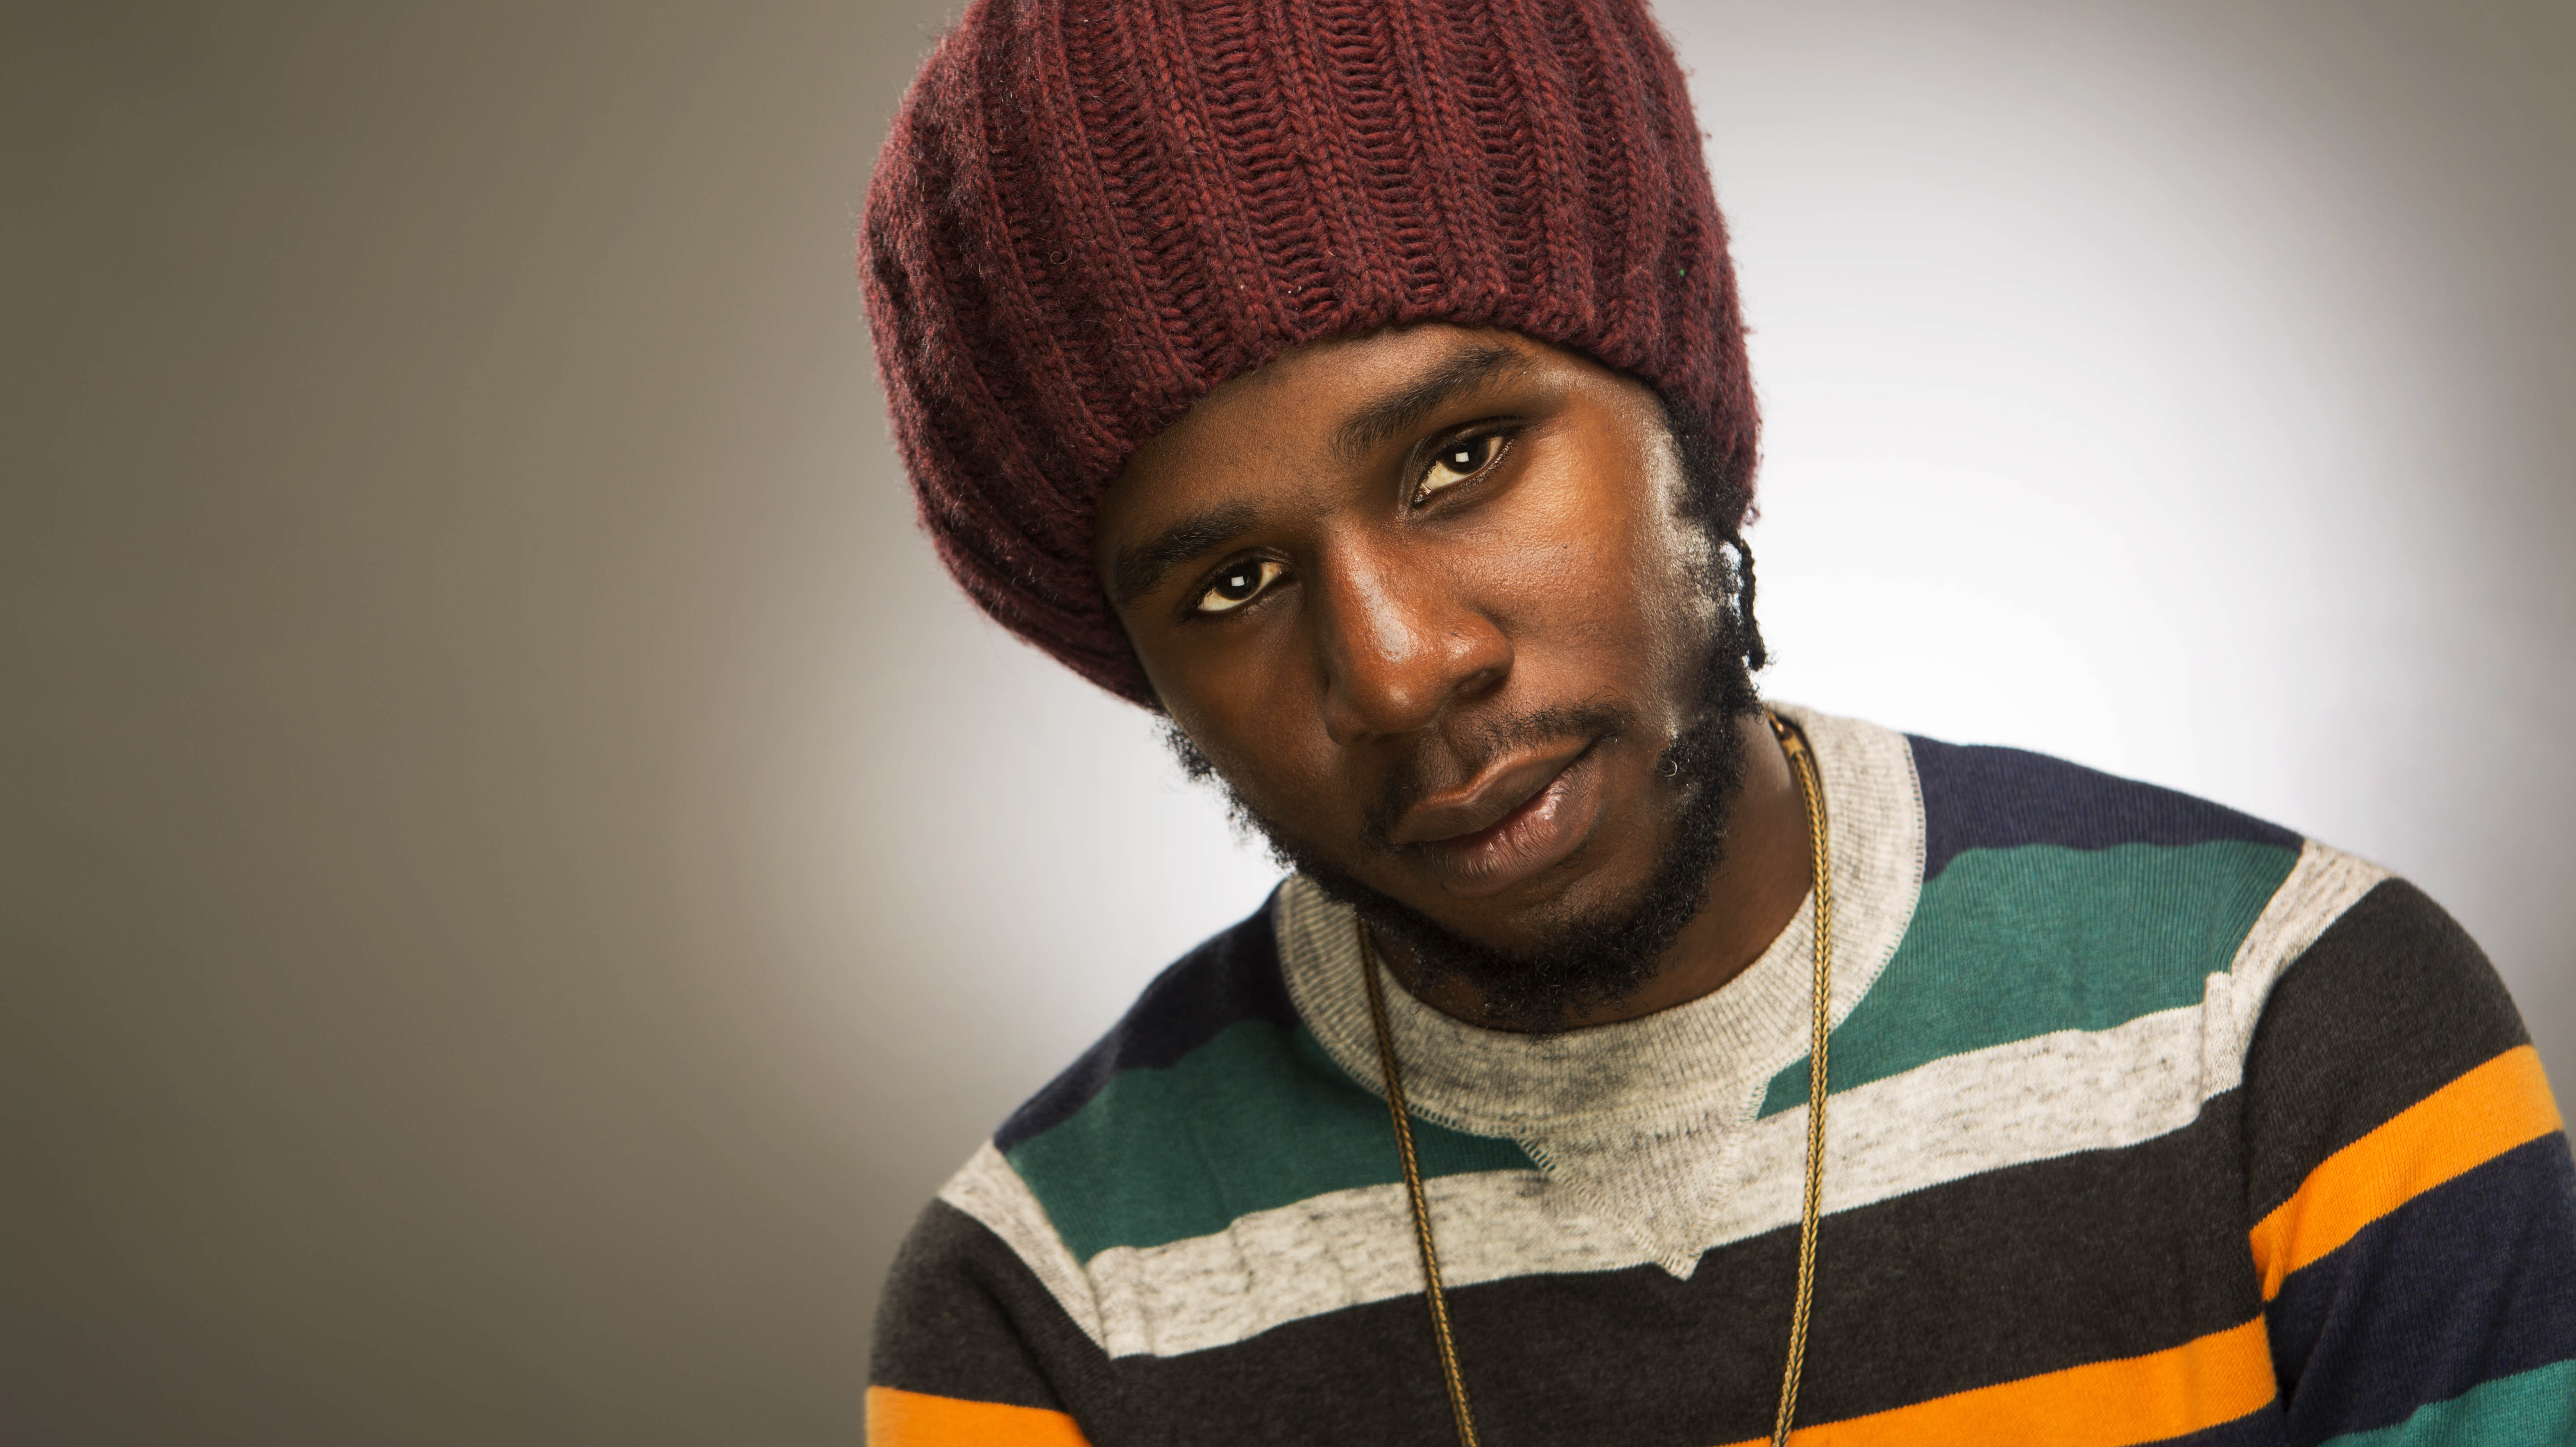 Chronixx Makes His US TV Debut On The Tonight Show With Jimmy Fallon